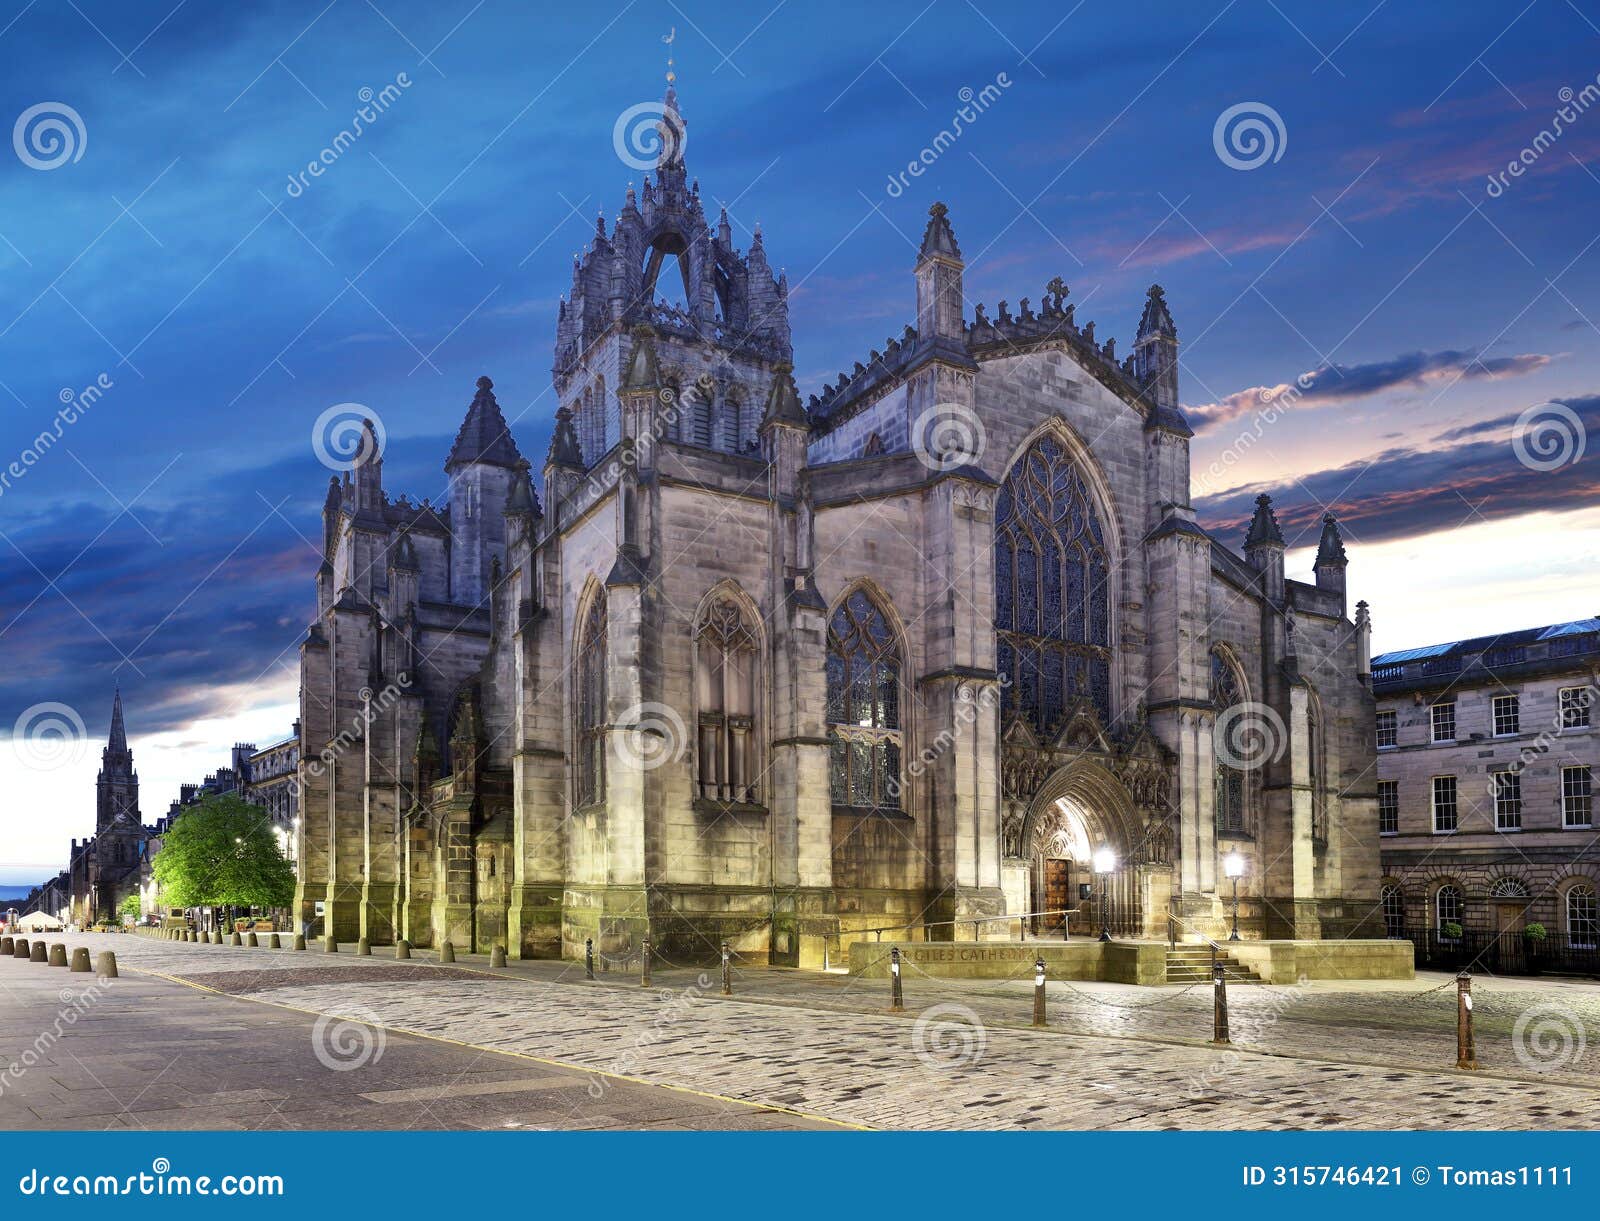 west parliament square with st giles cathedral at night, panorama - edinburgh, scotland